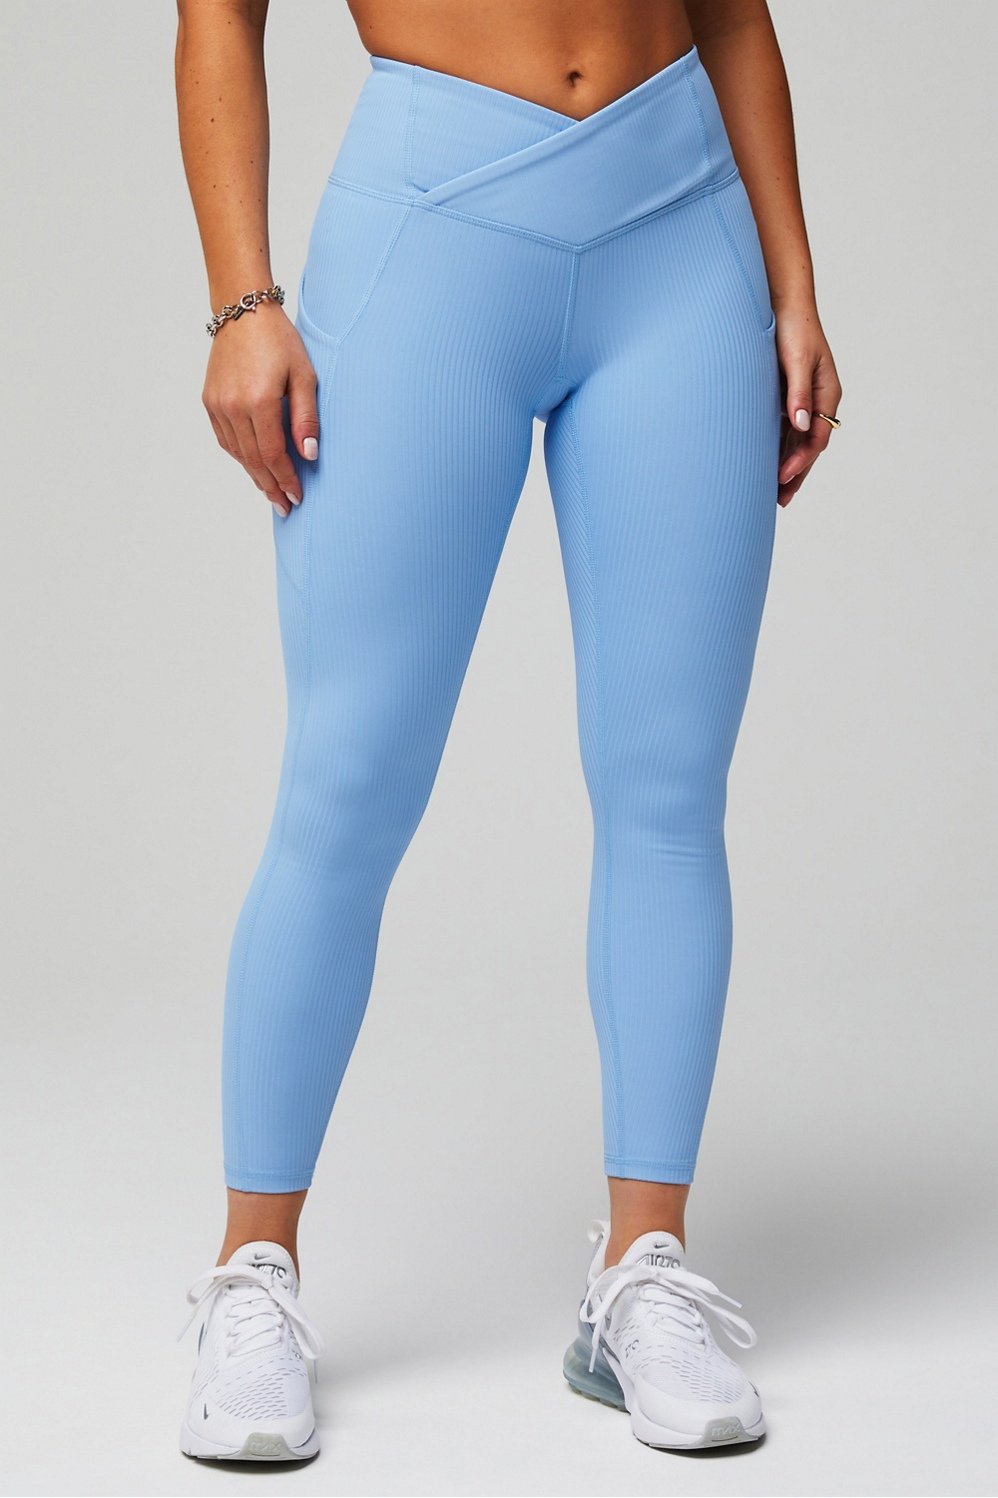 Yoga Pants, Fitness Apparel & Workout Clothes for Women